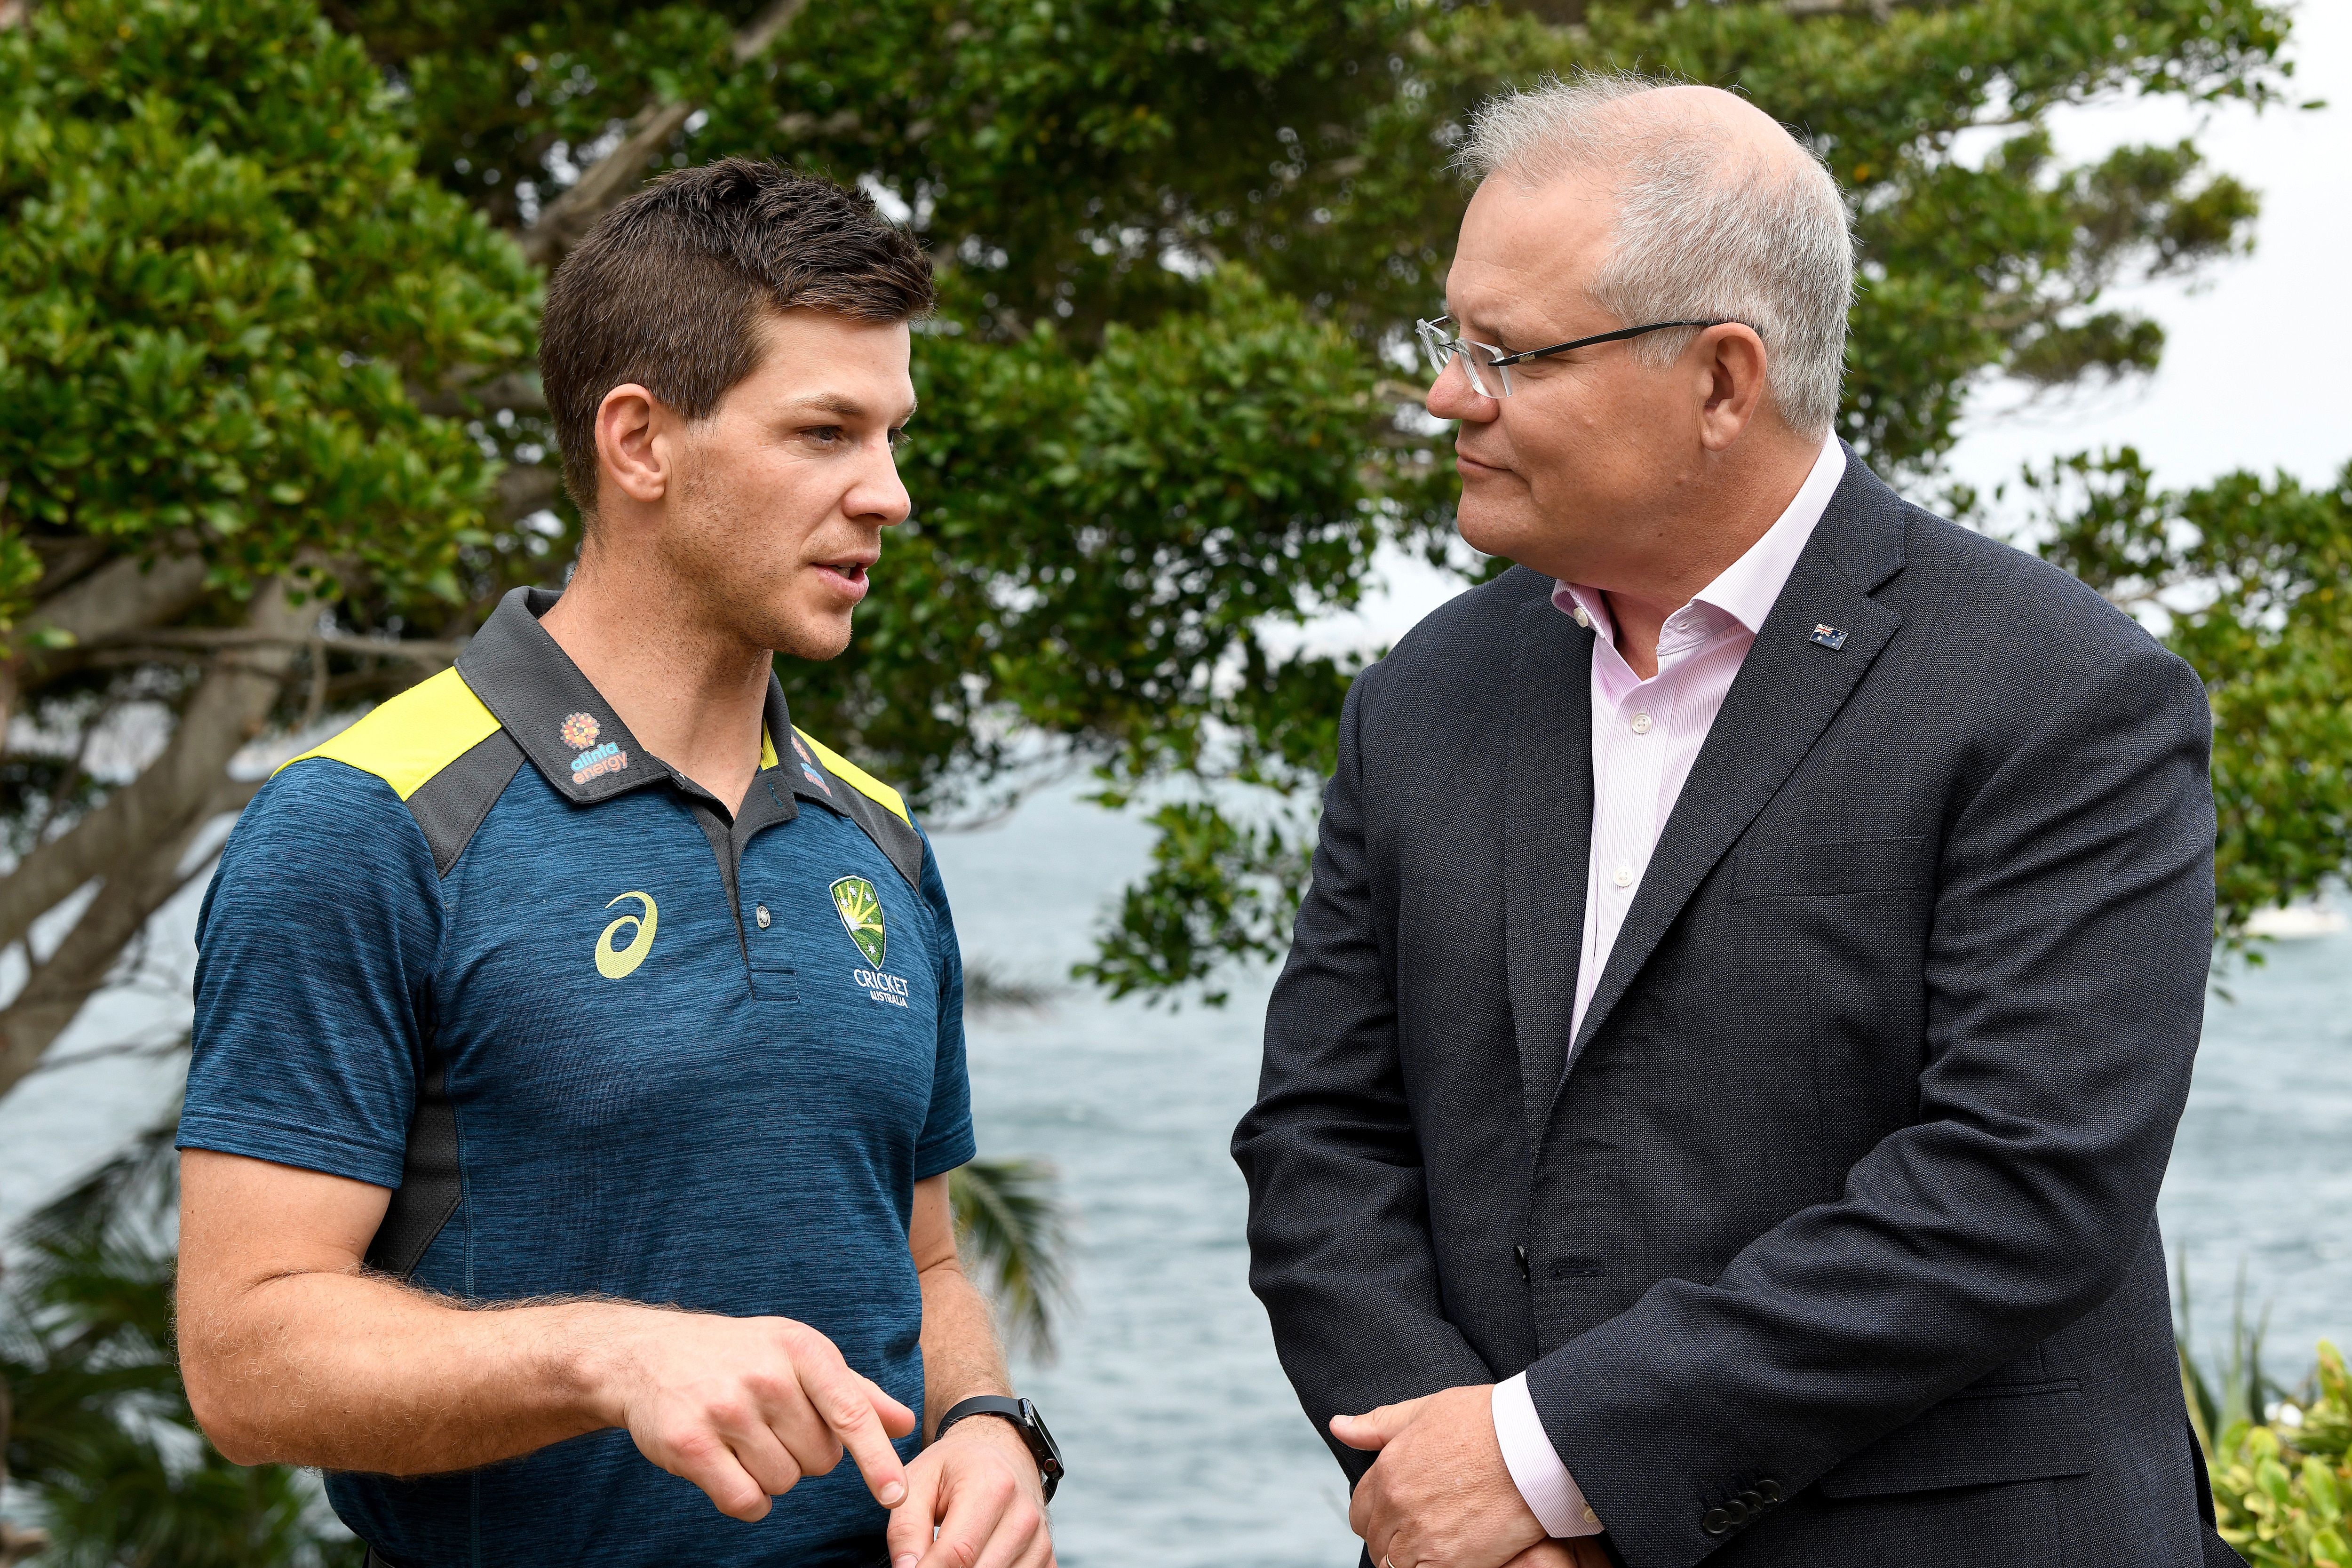 Australian cricket captain Tim Paine and Prime Minister Scott Morrison during a New Year's reception for aine and Prime Minister Scott Morrison during a New Year's reception for the Australian and New Zealand cricket teams.